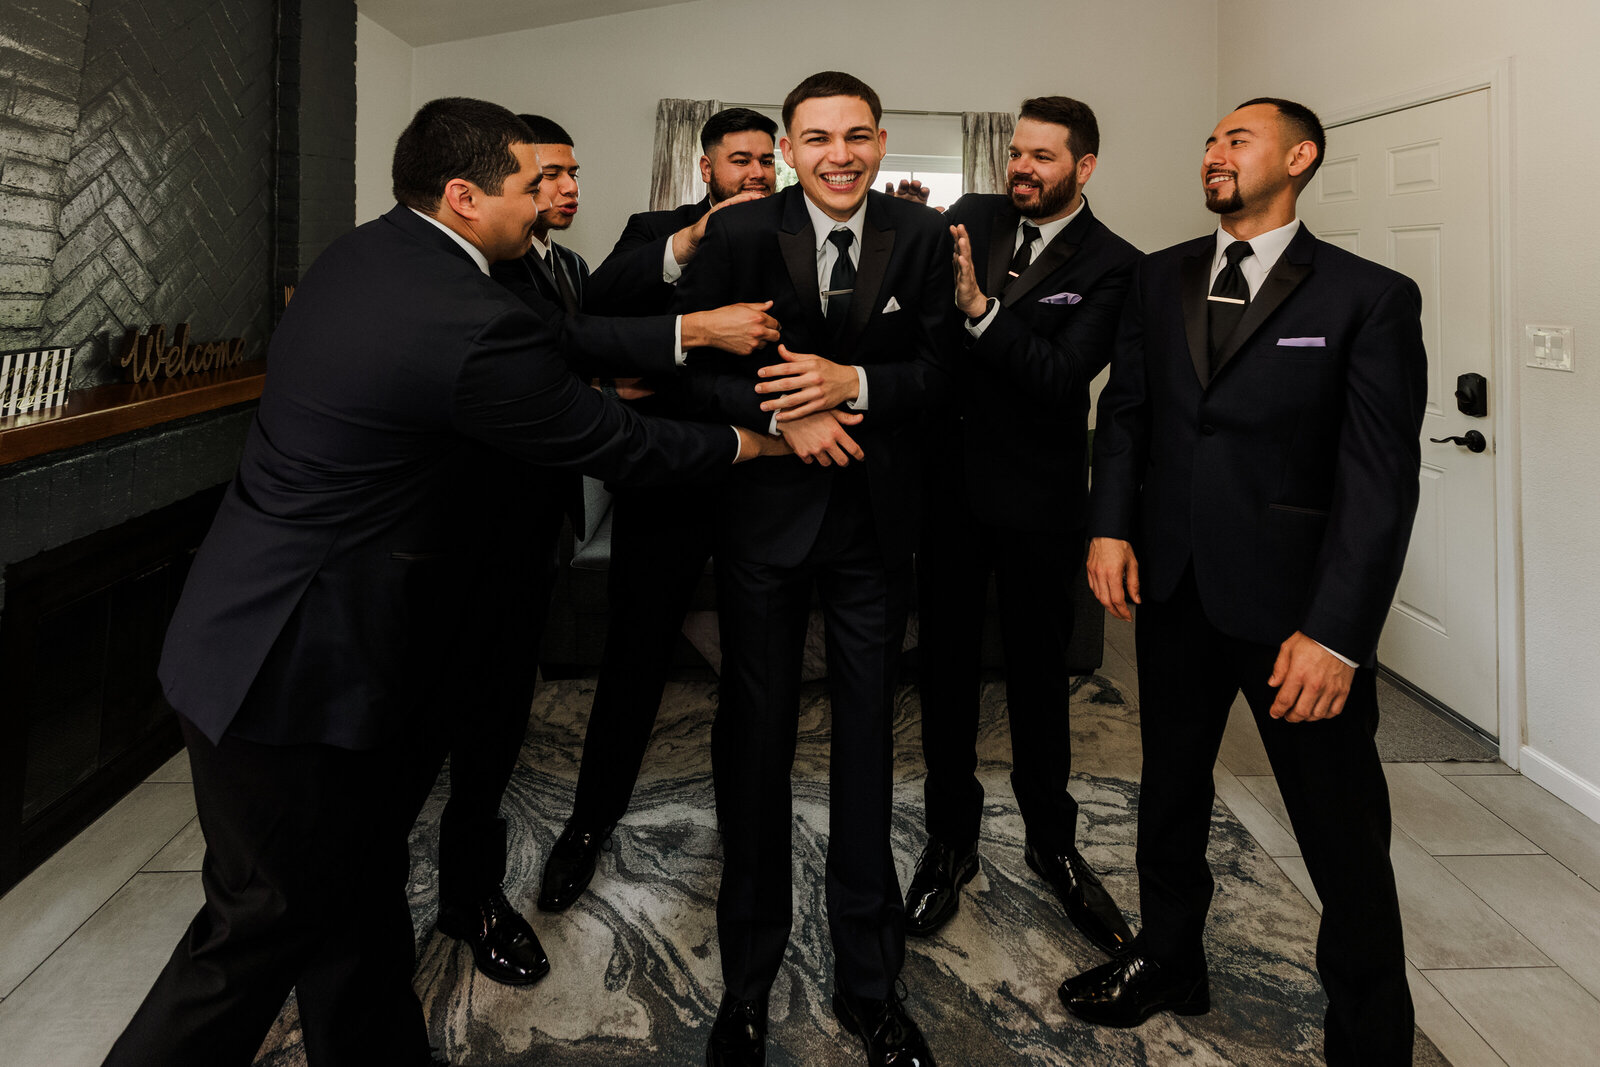 Groomsmen have a laugh with the Groom before the wedding